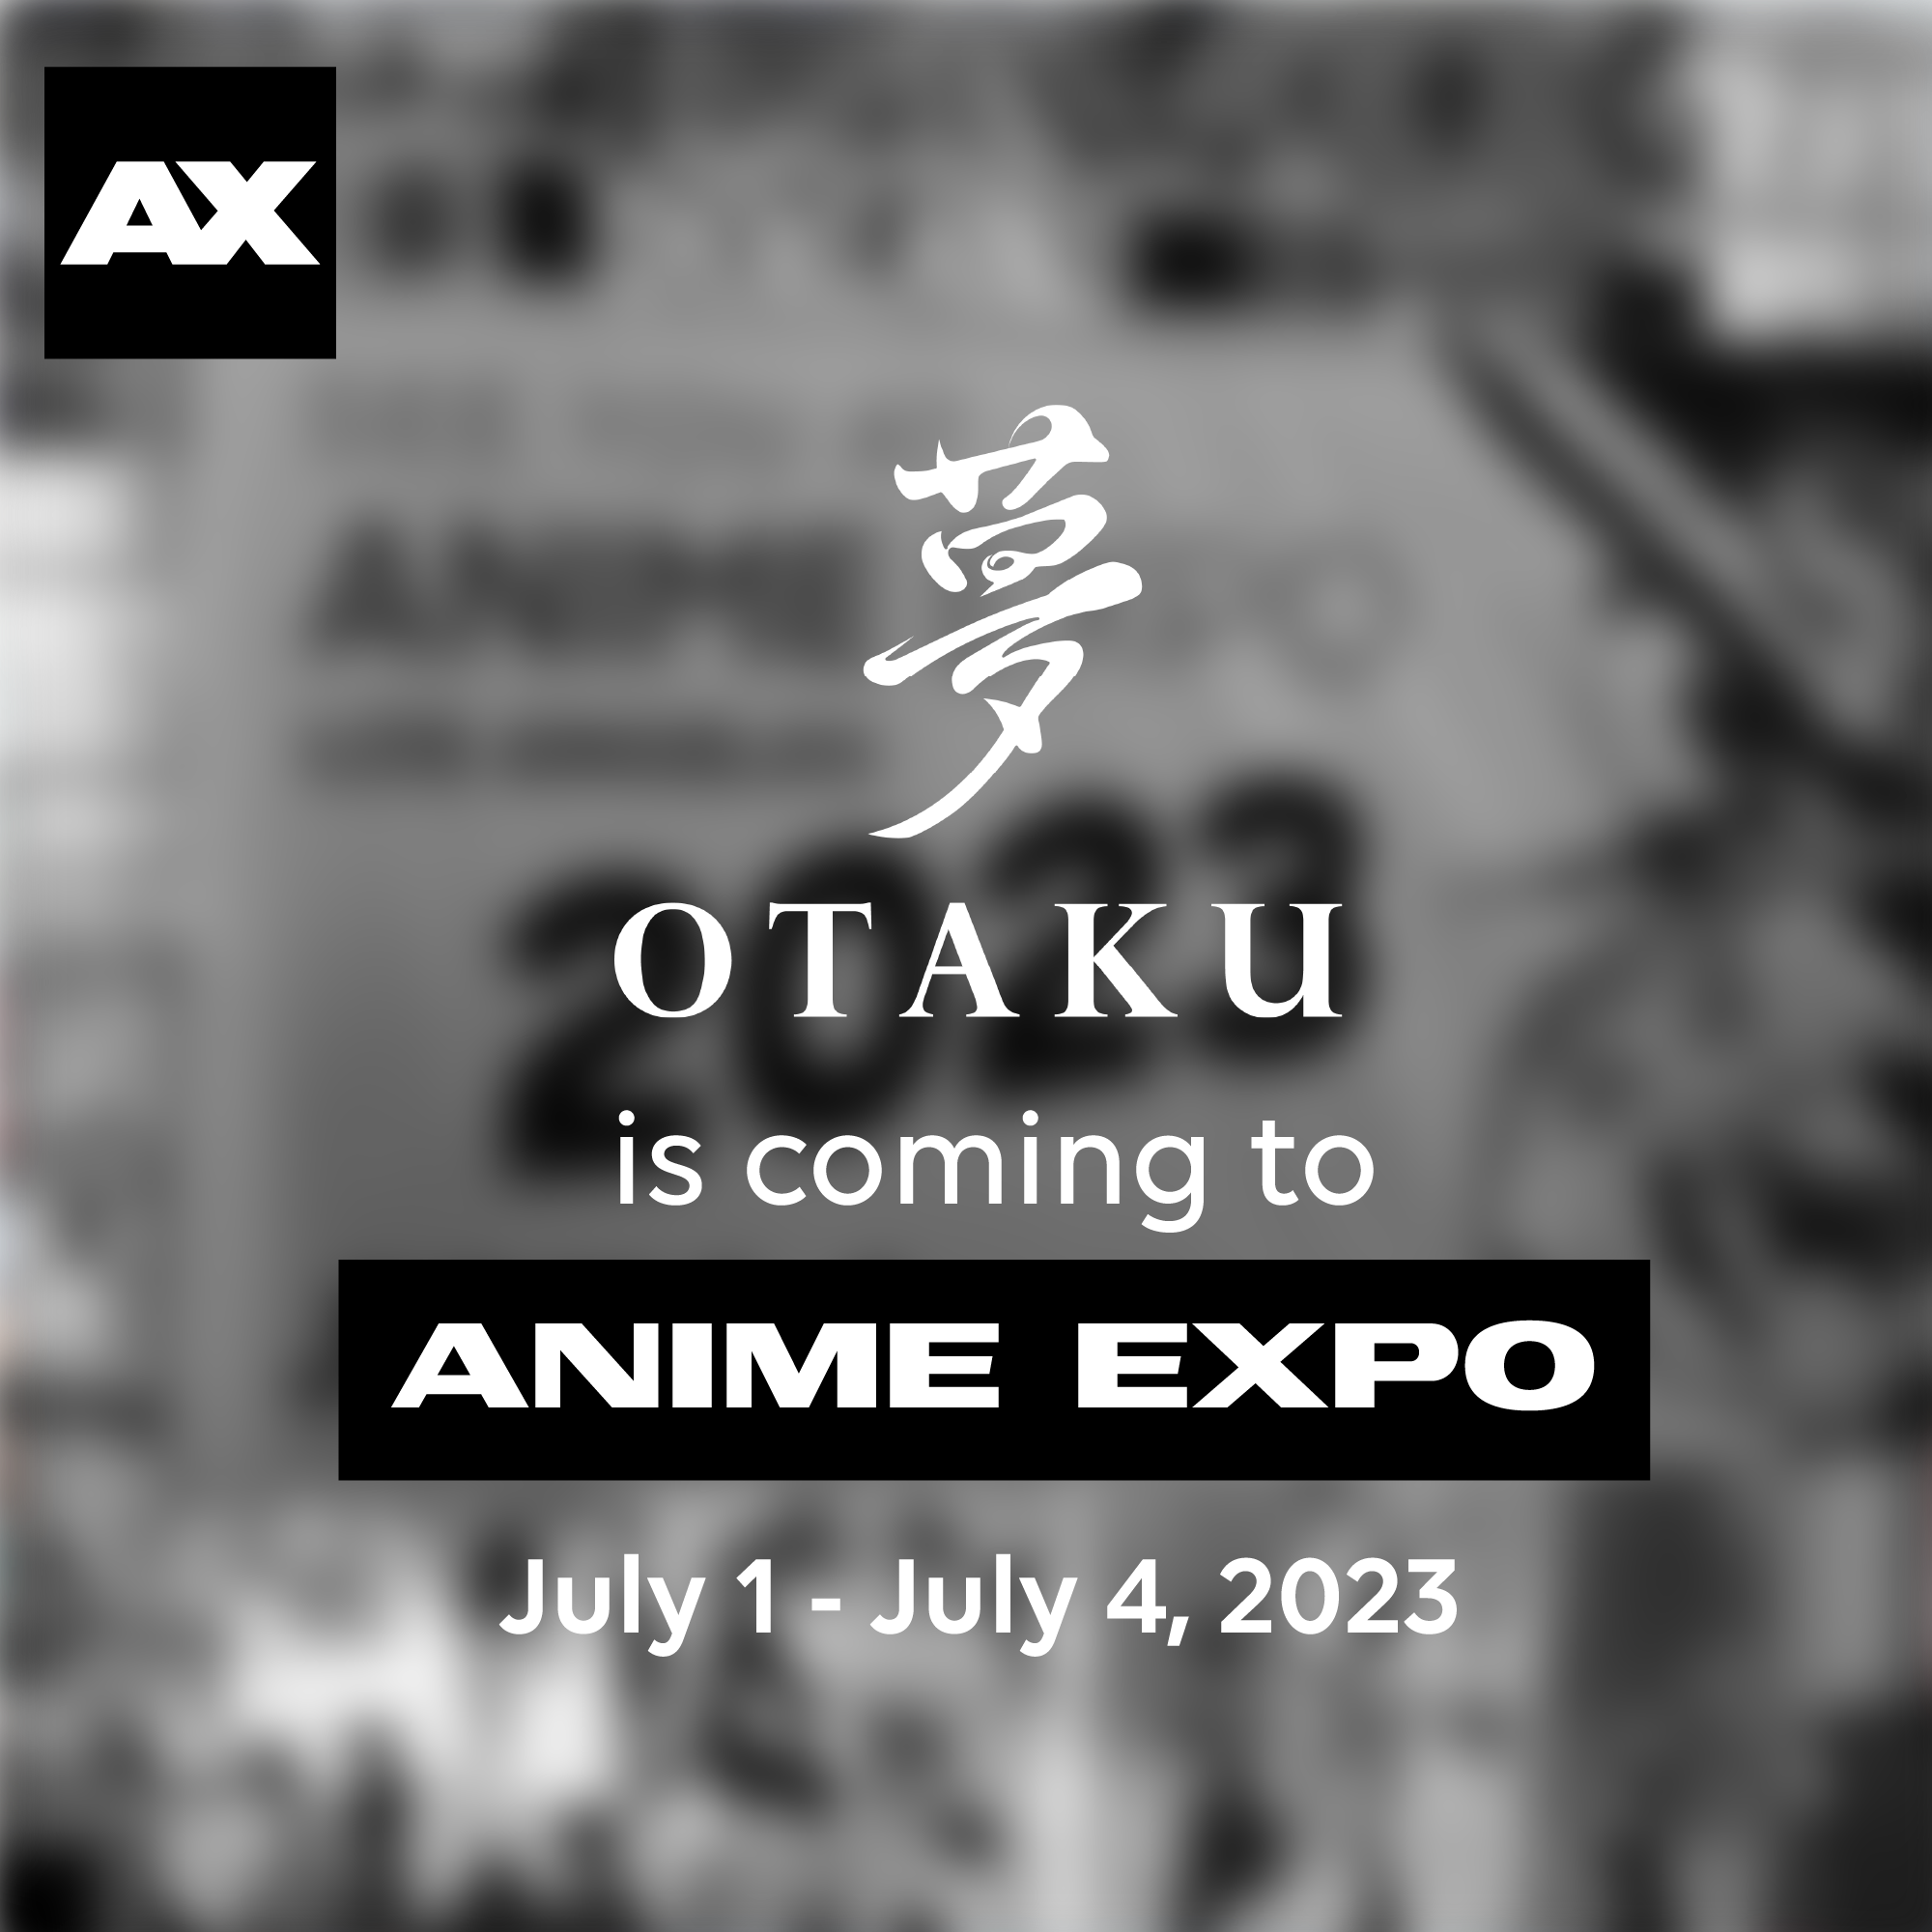 Anime Expo 2023: Crunchyroll Has Big Plans in Place - Here's A Look!